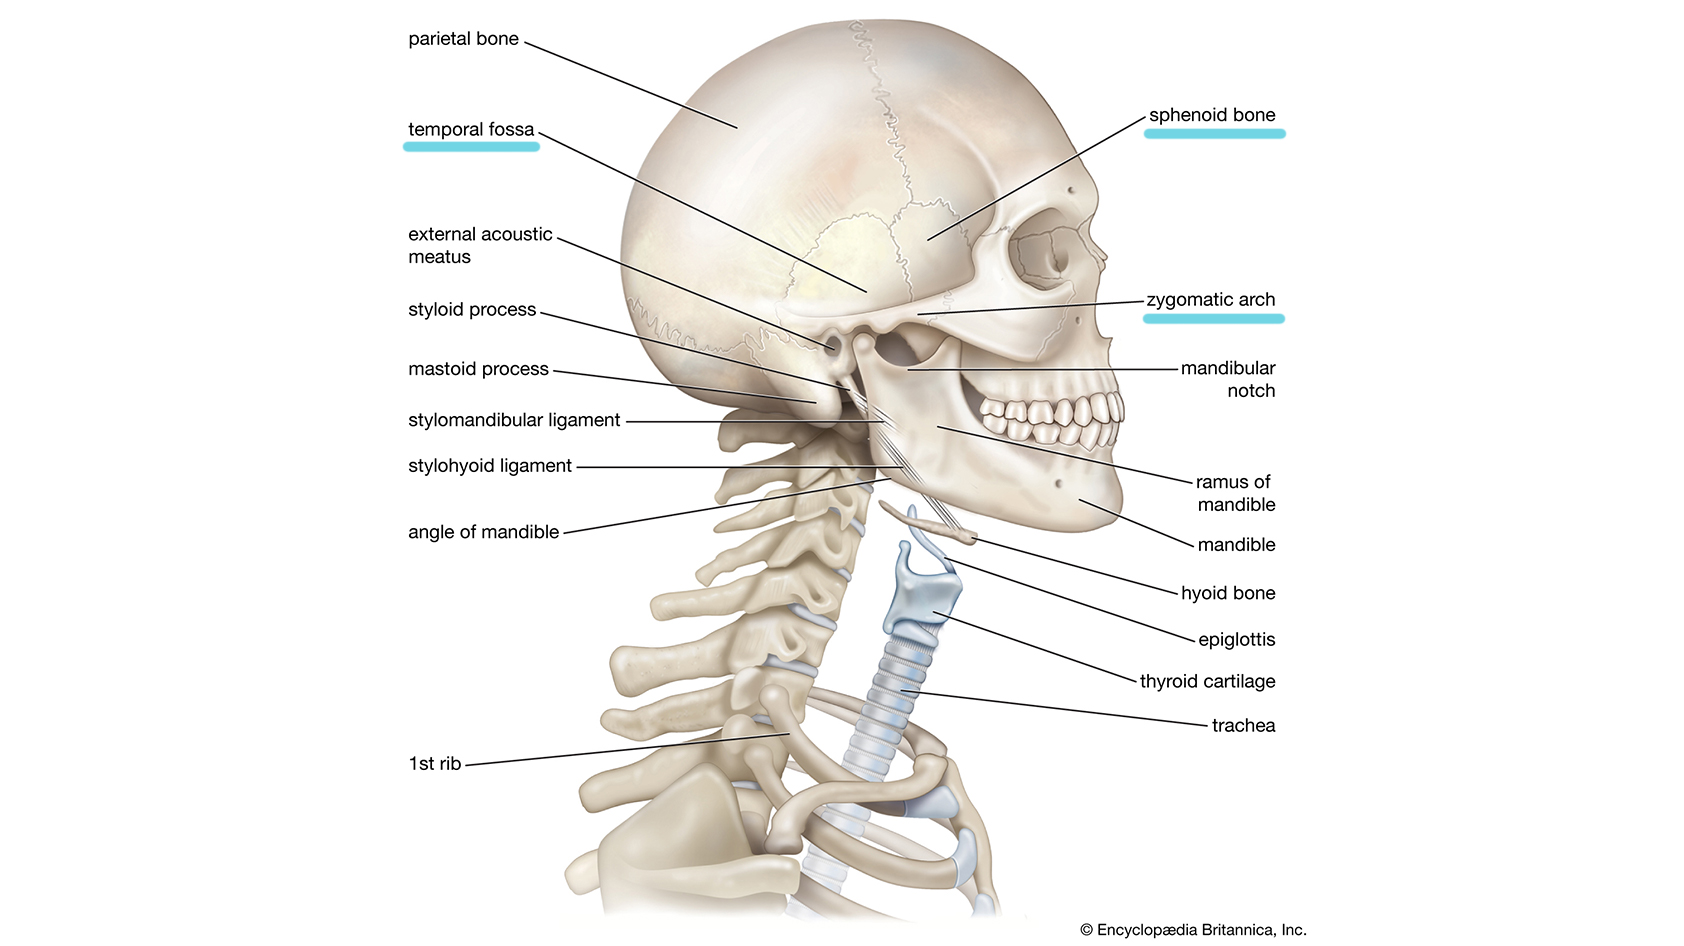 An anatomical image of the human head and neck bone structure, anatomically labeled.